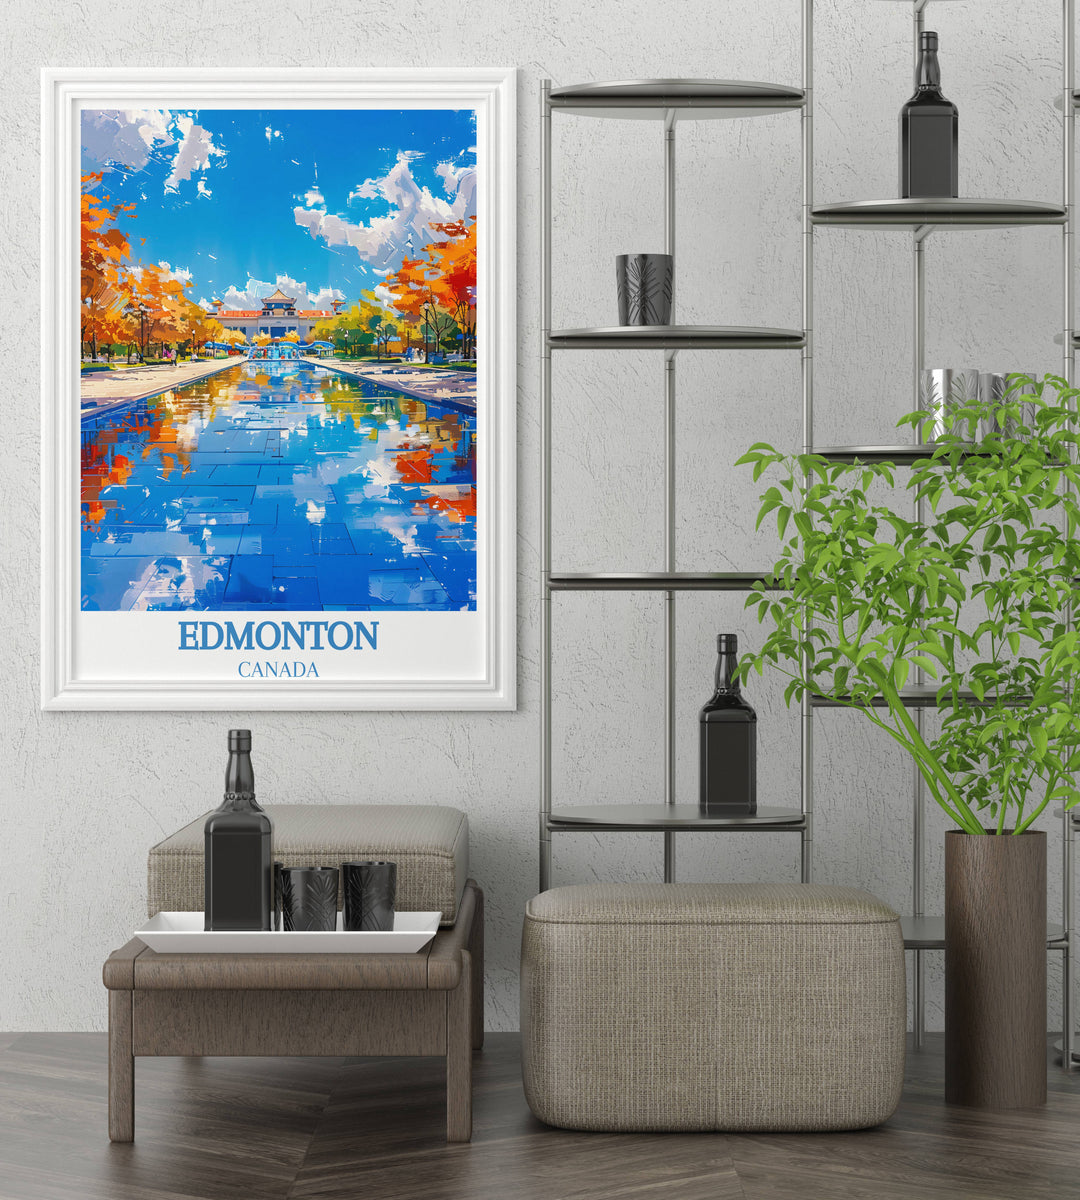 Edmonton Wall Art - Unique Art Prints and Posters that Bring the City's Spirit to Your Home